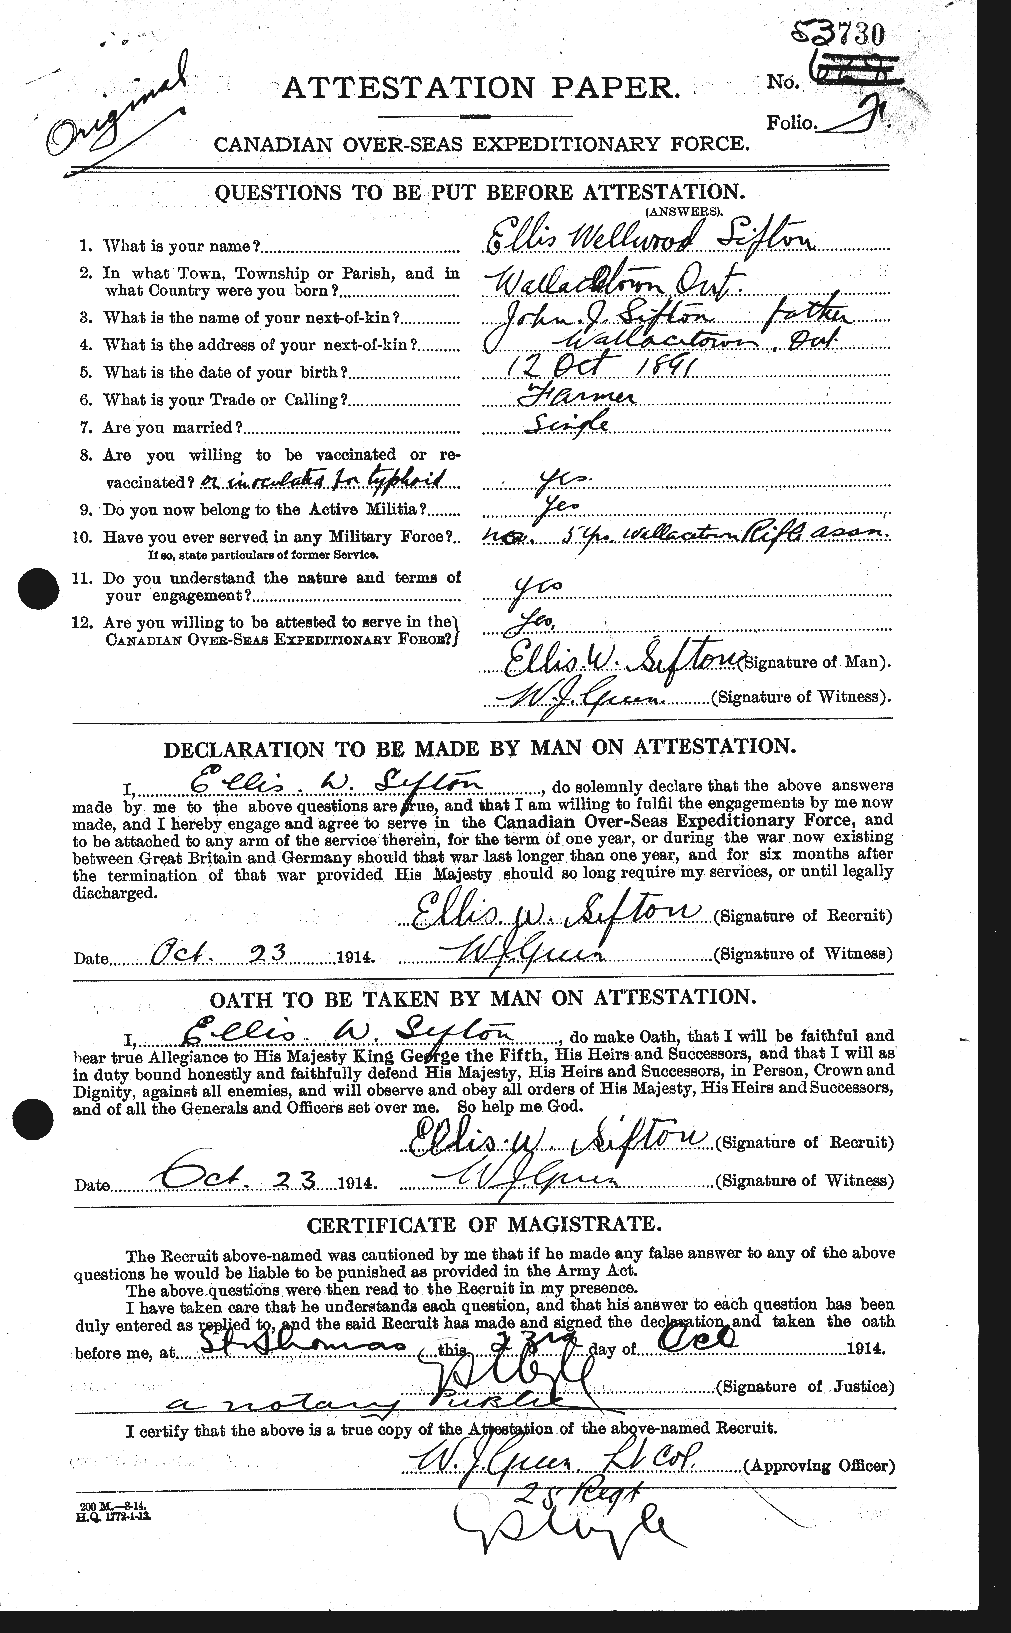 Personnel Records of the First World War - CEF 206287a